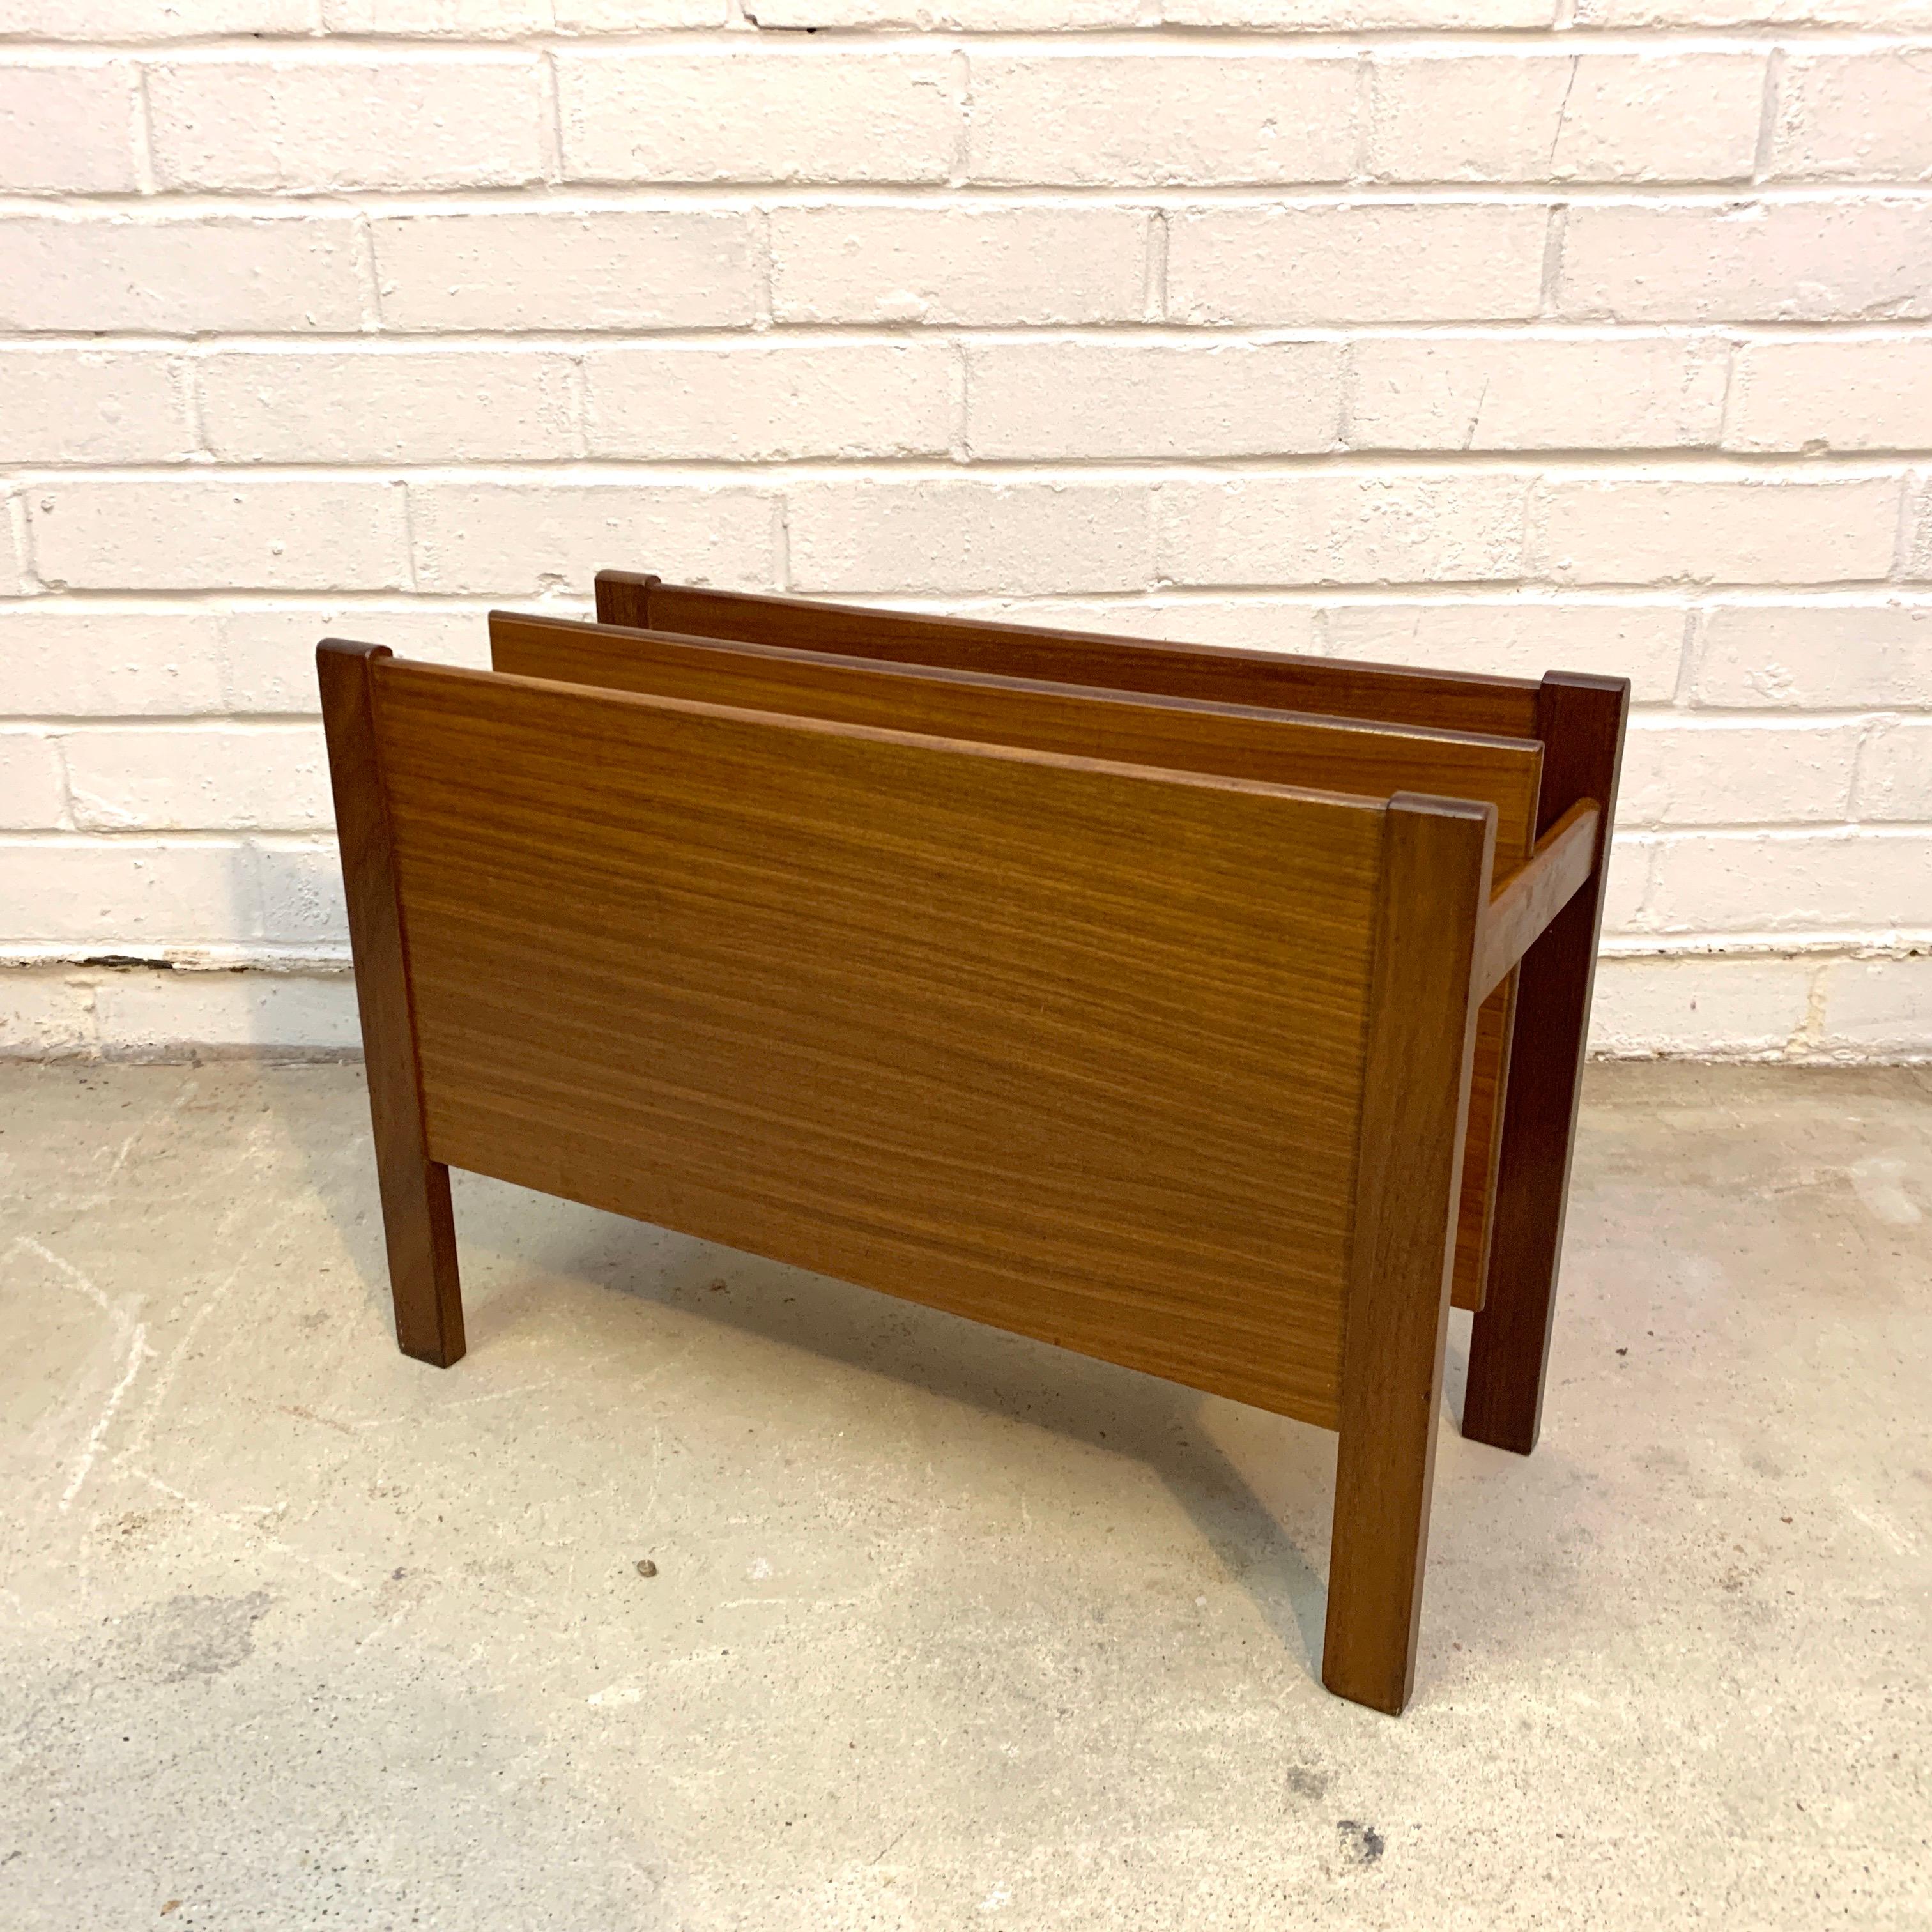 Teak magazine rack - Canterbury by Guy Rogers for Heals department store in the 1960s.

In excellent vintage condition.

Measures : H: 36cm W: 51cm D: 28cm.